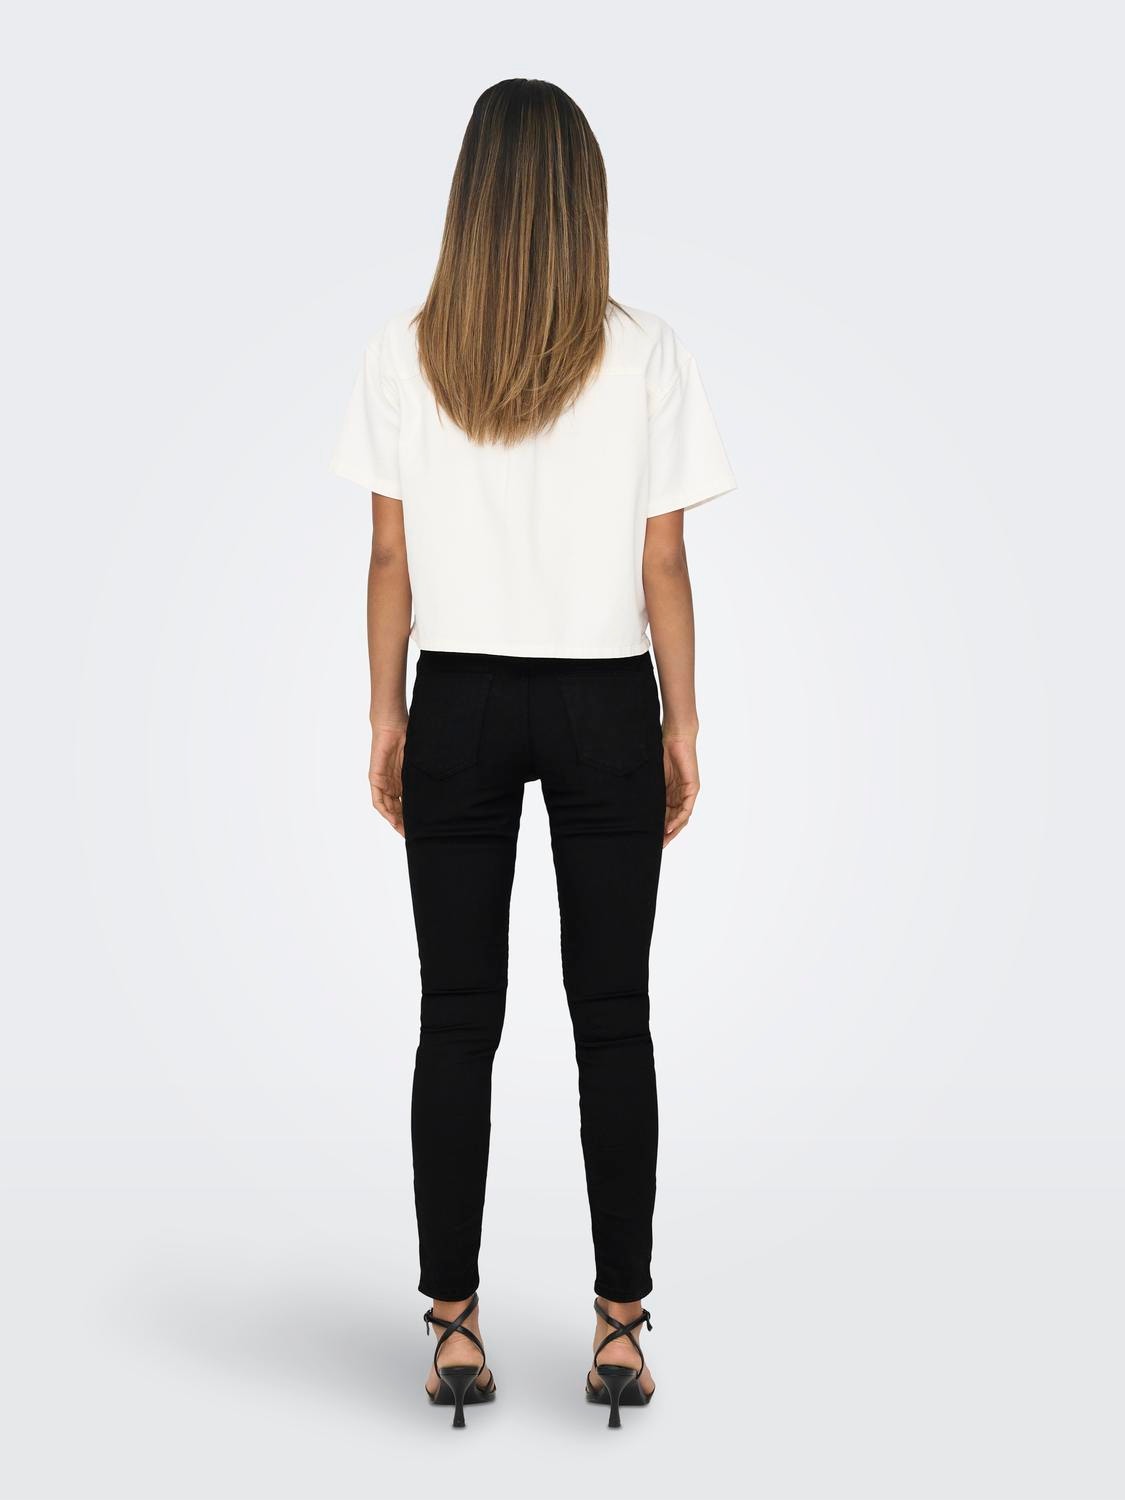 ONLY Jeans Skinny Fit Taille moyenne -Black - 15281319